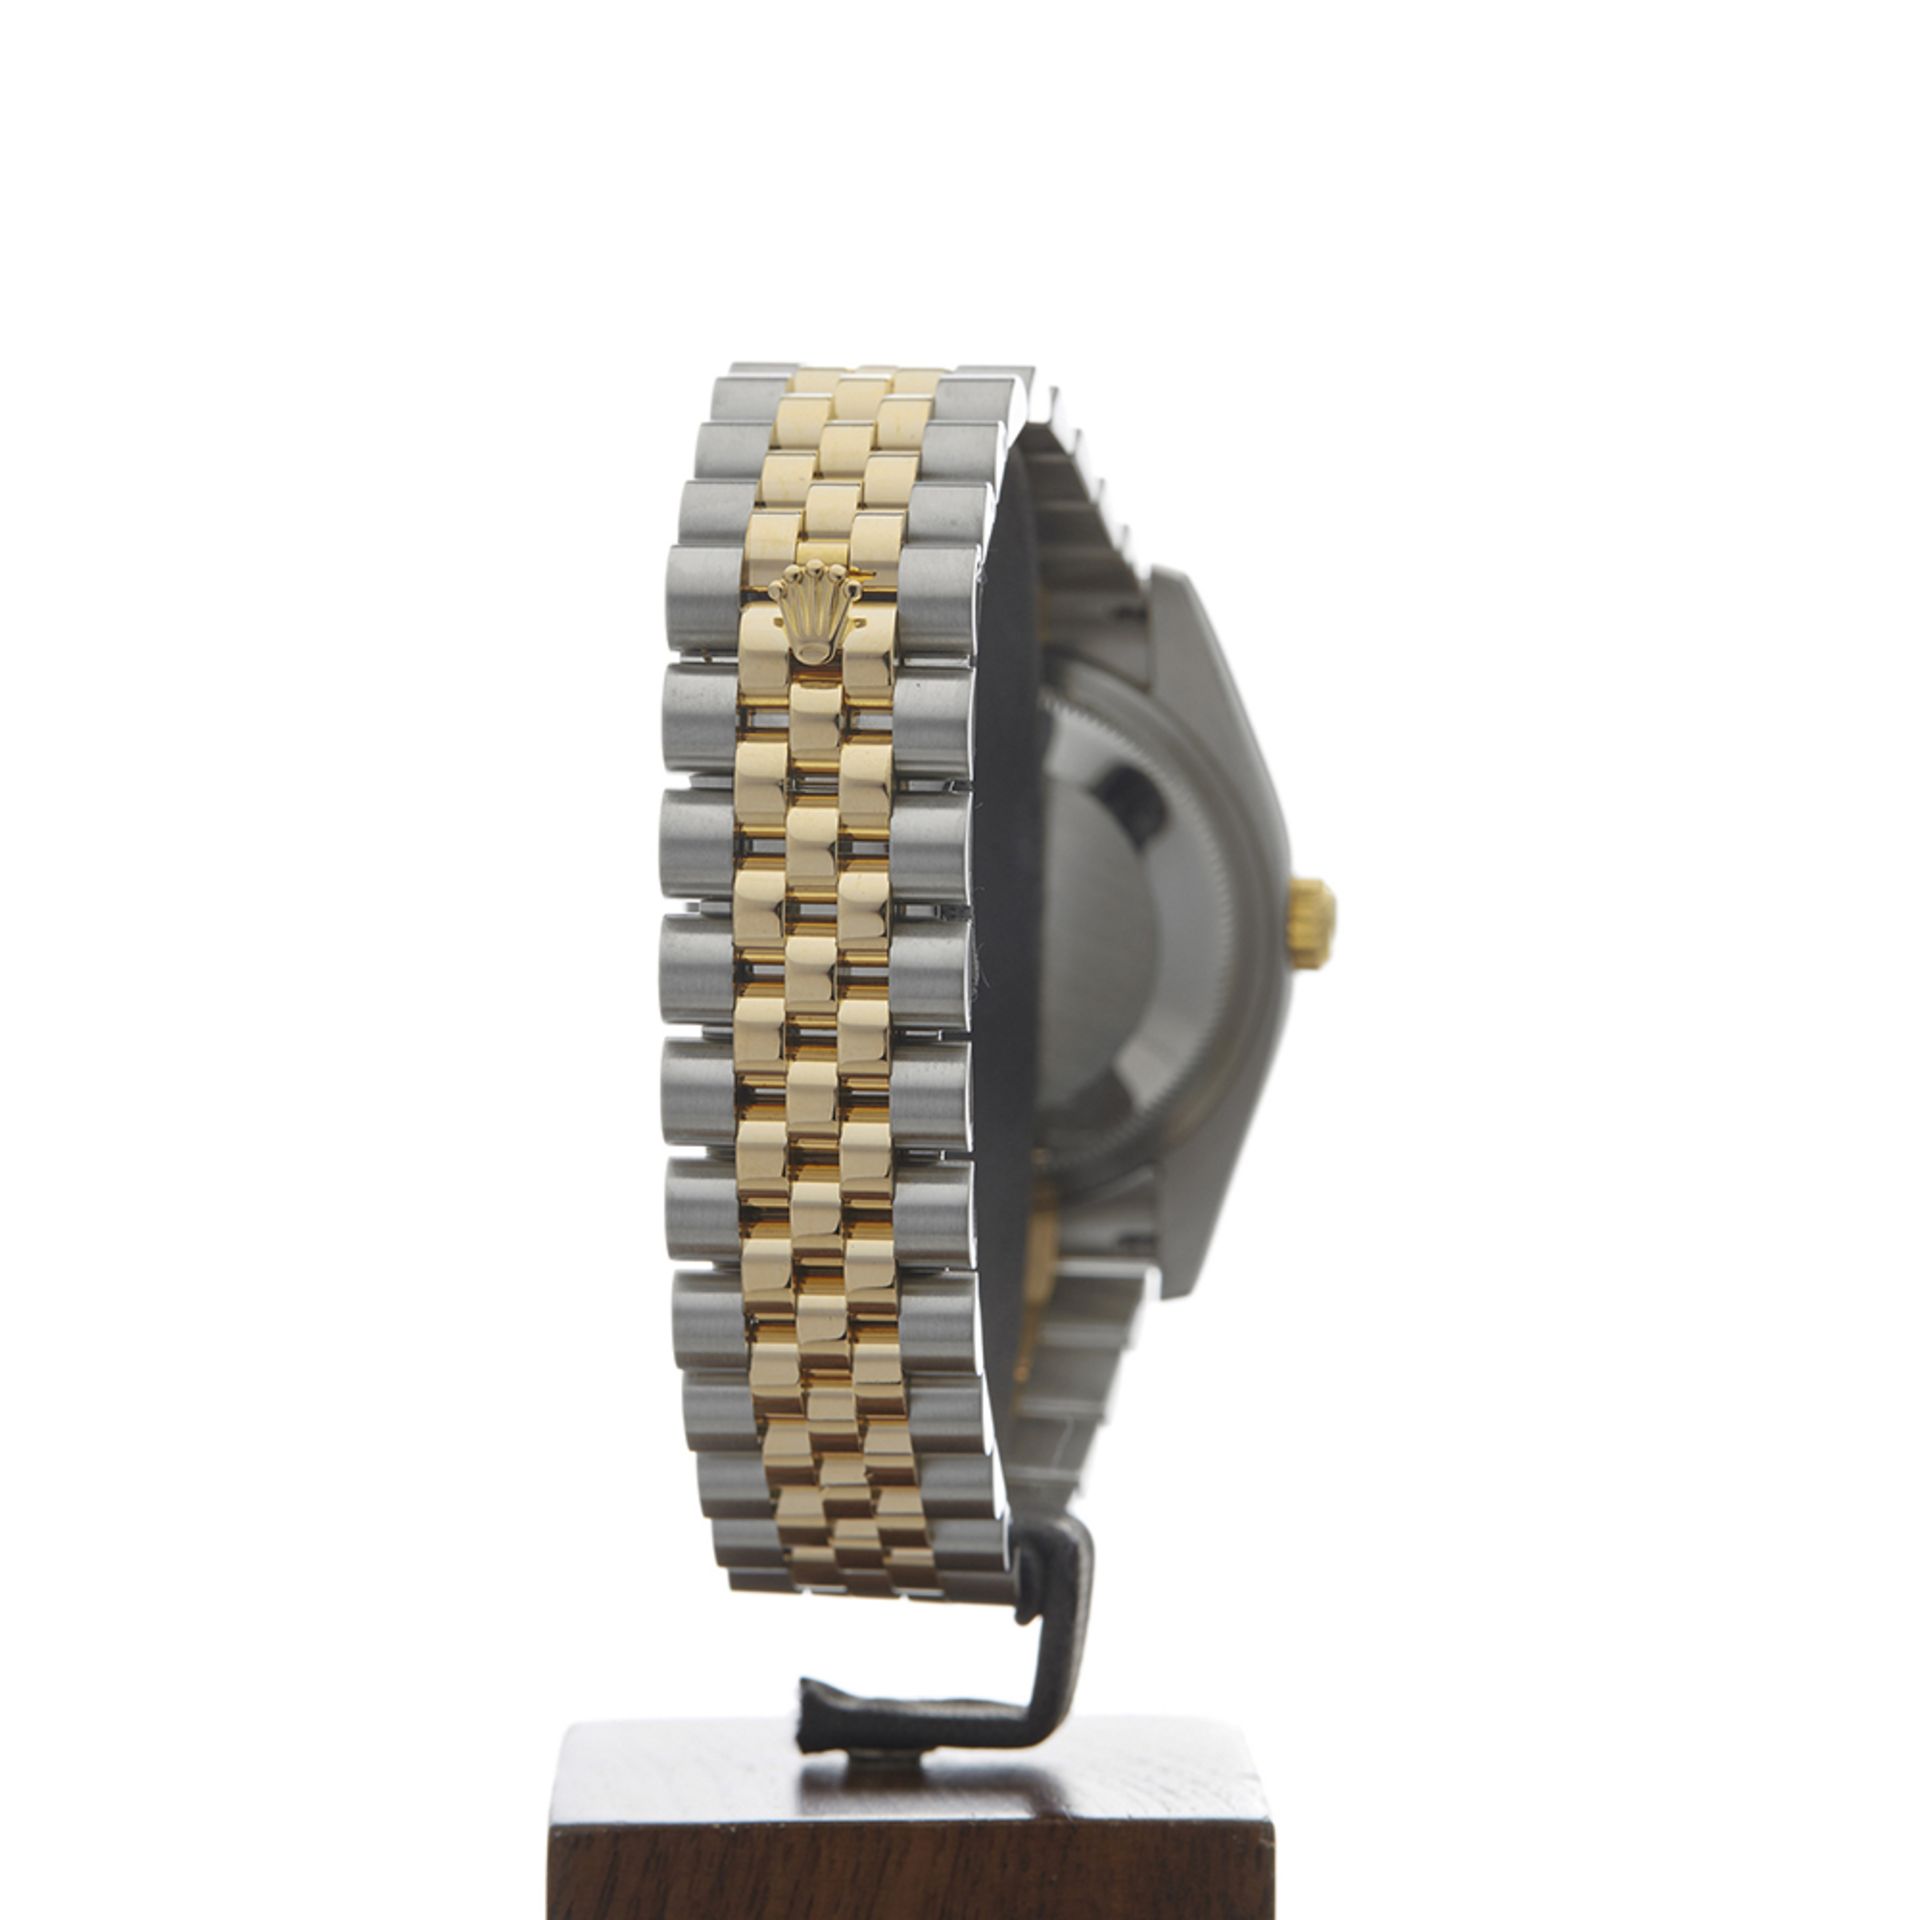 Datejust Turn-o-graph 36mm Stainless Steel & 18k Yellow Gold - 116263 - Image 7 of 9